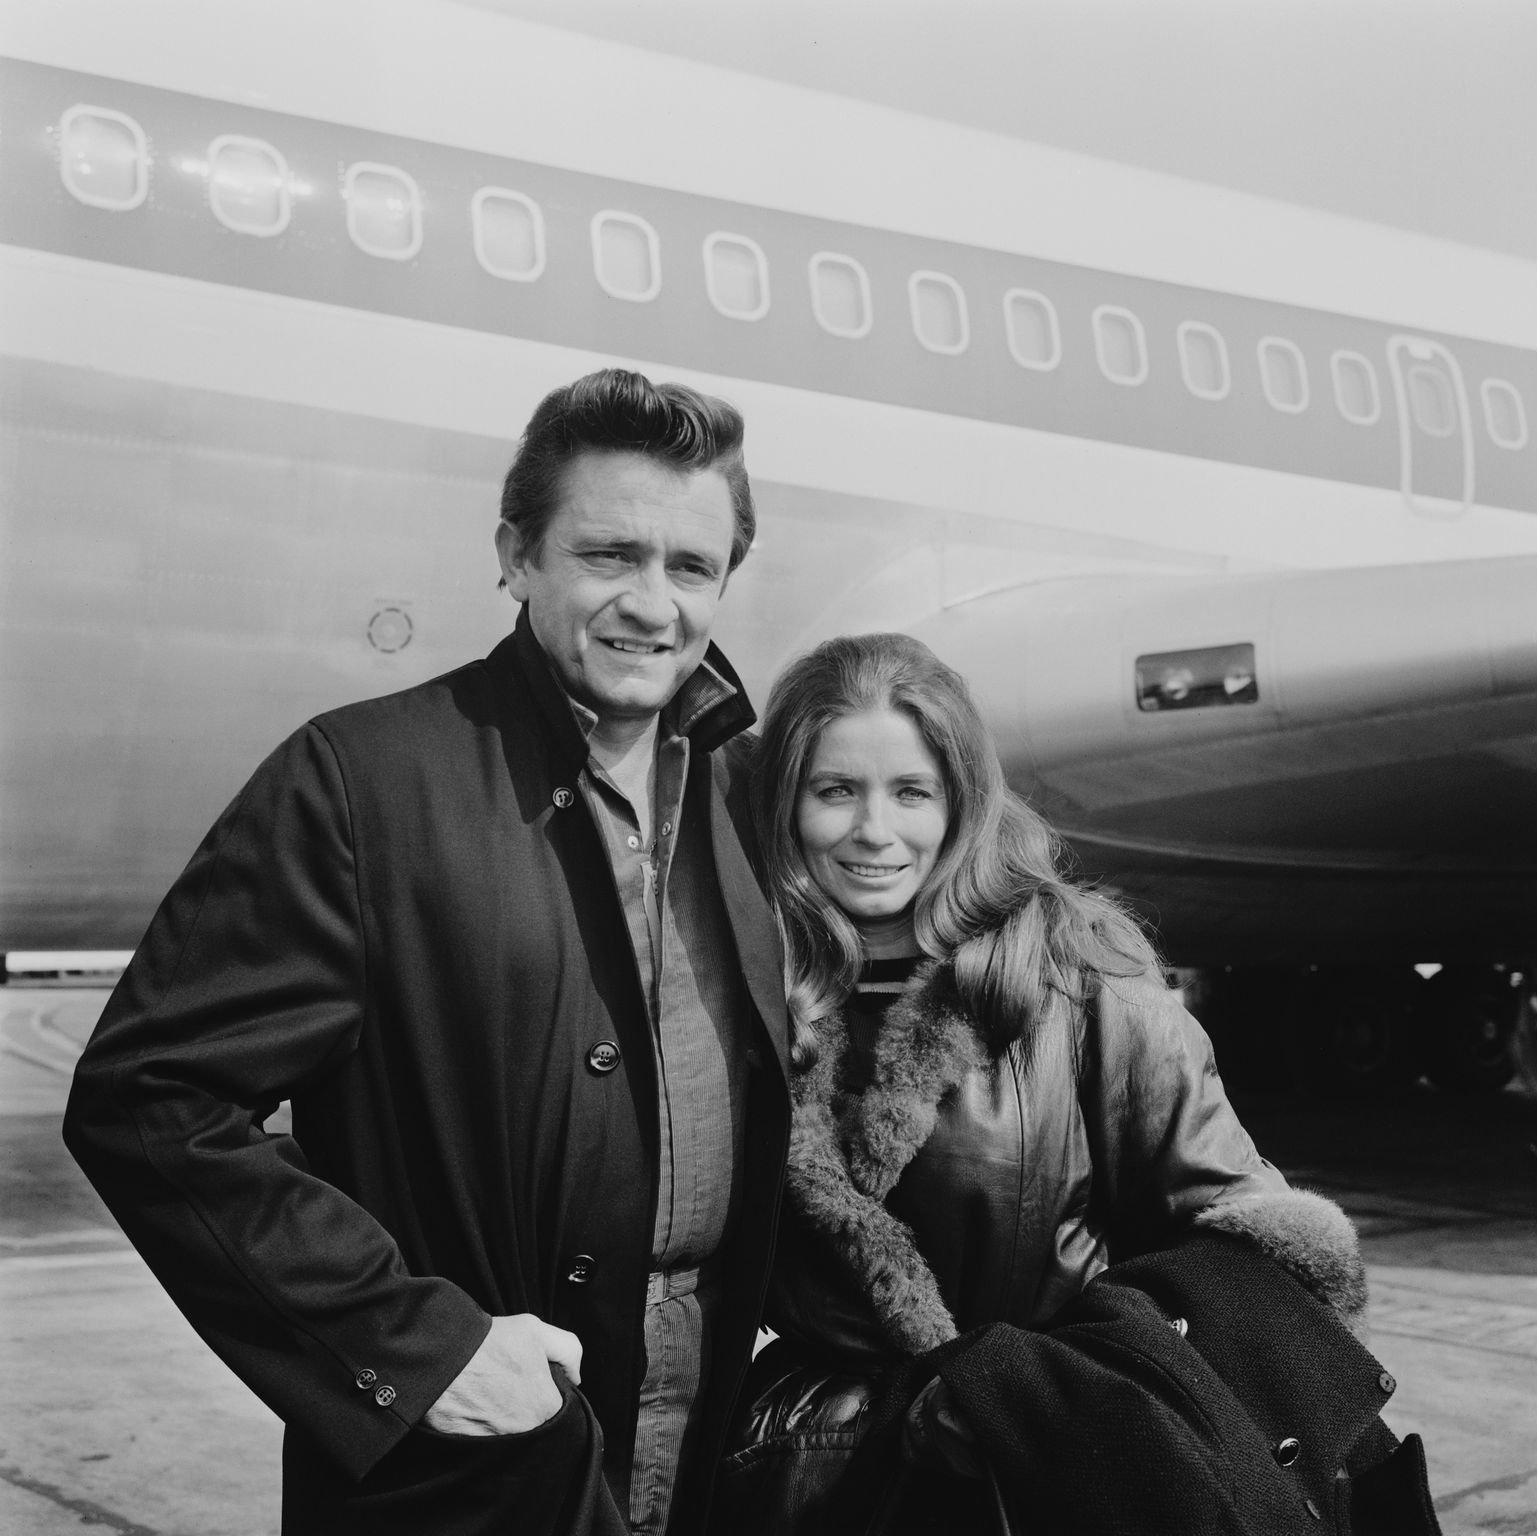 Johnny Cash with his wife, American singer and actress June Carter at Heathrow Airport, UK,1968 | Source: Getty Images